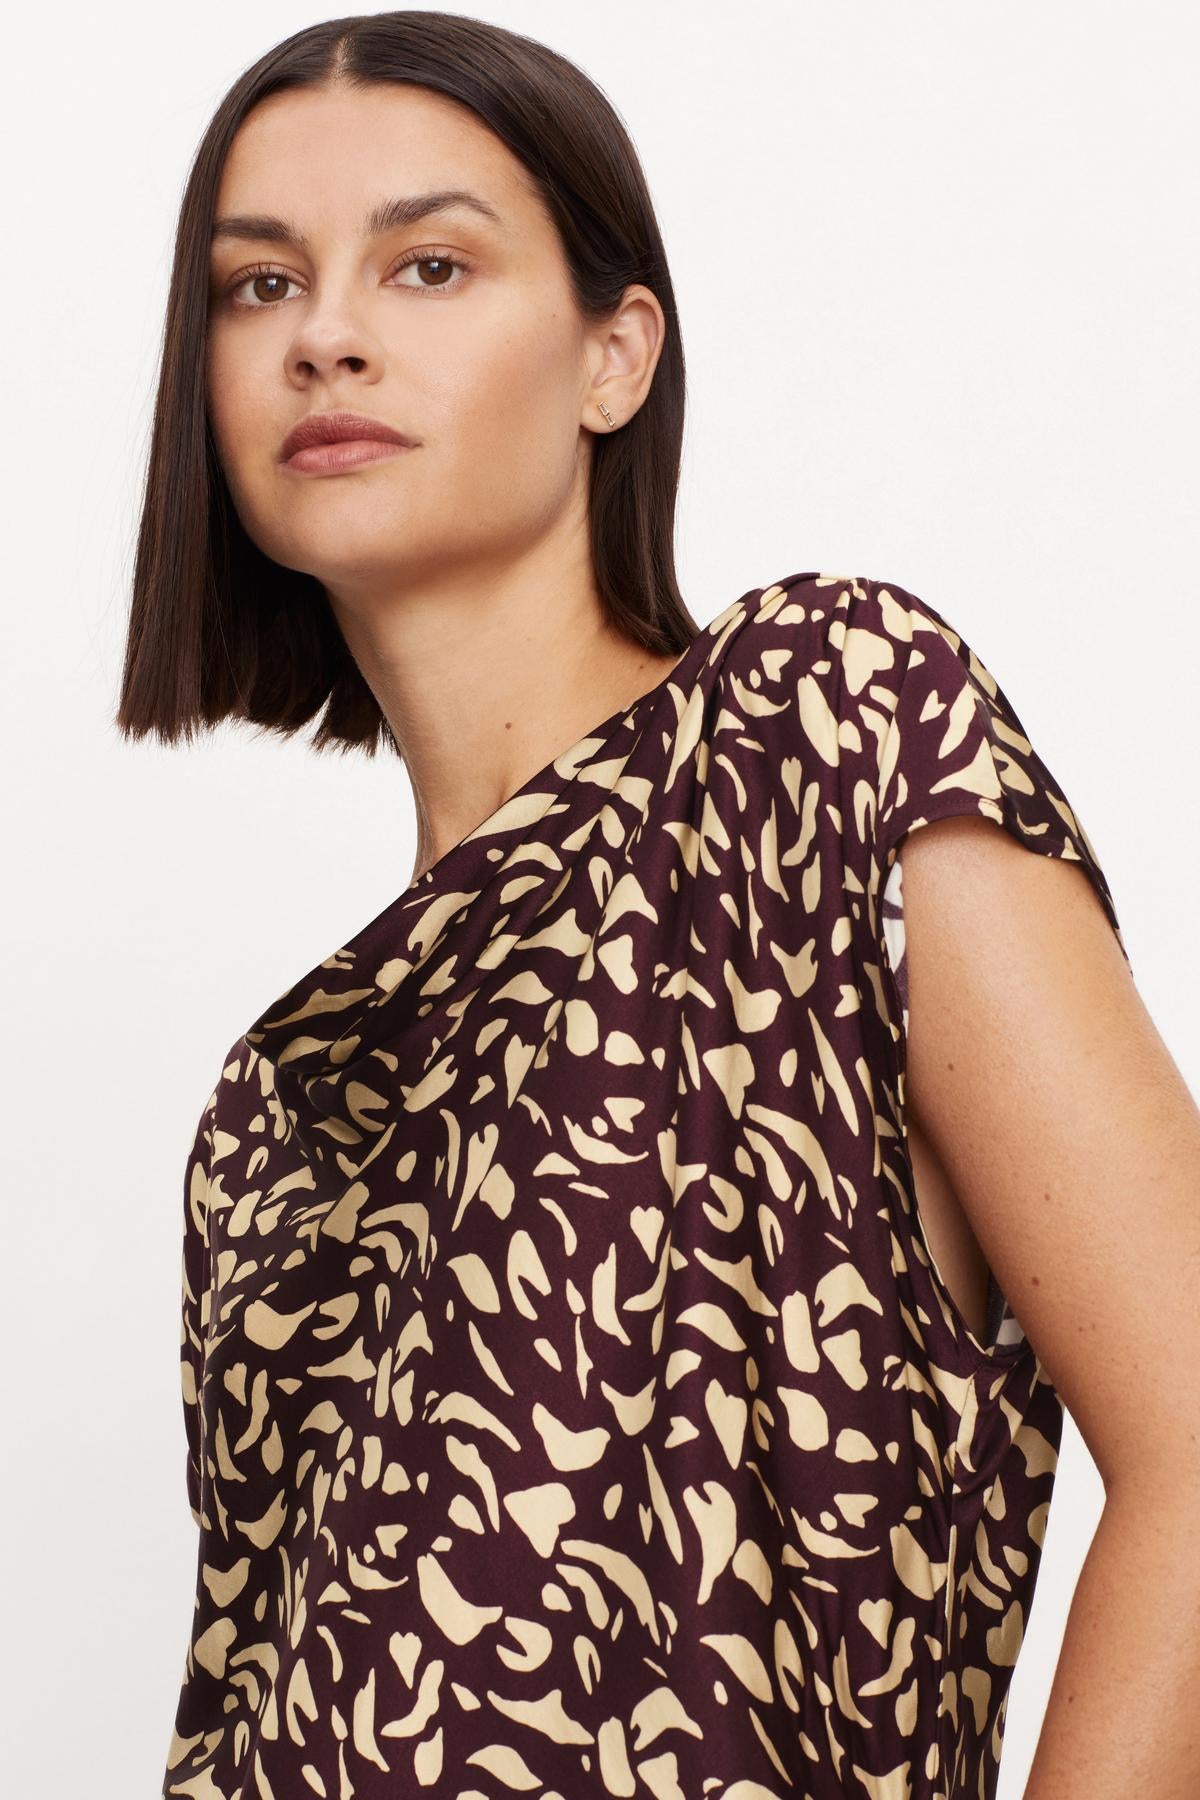   The model is wearing a DEVI PRINTED SATIN BLOUSE by Velvet by Graham & Spencer. 